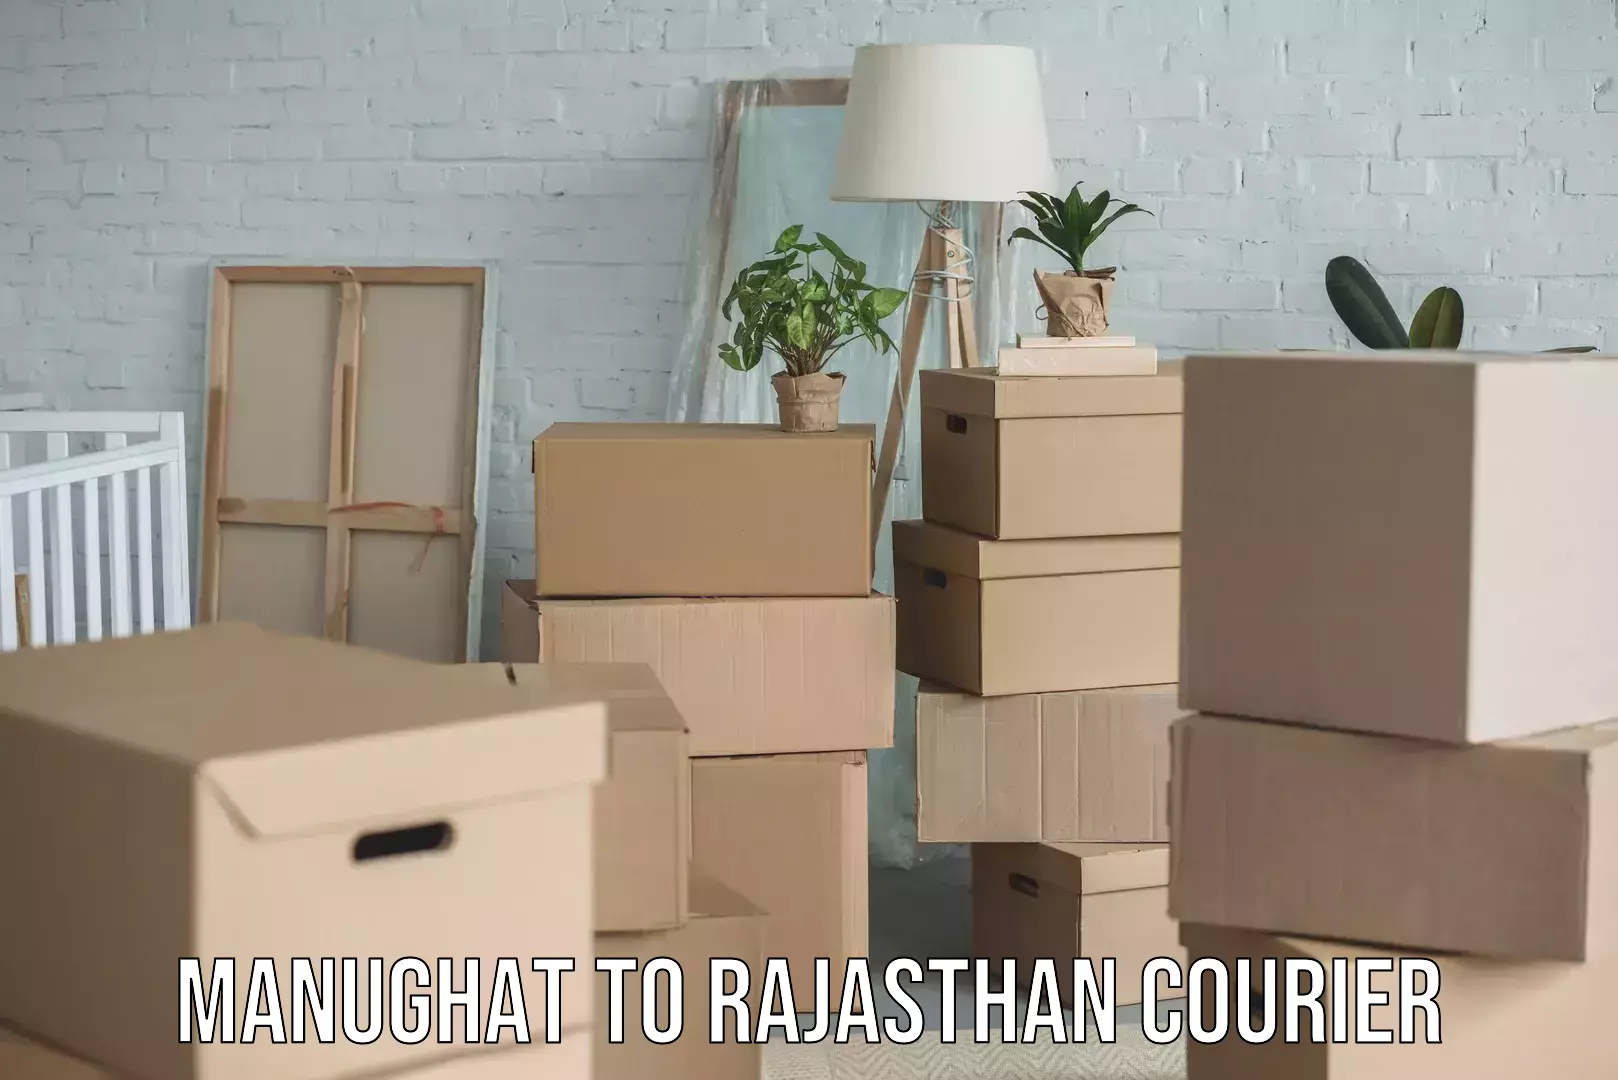 Urban courier service Manughat to Rajasthan